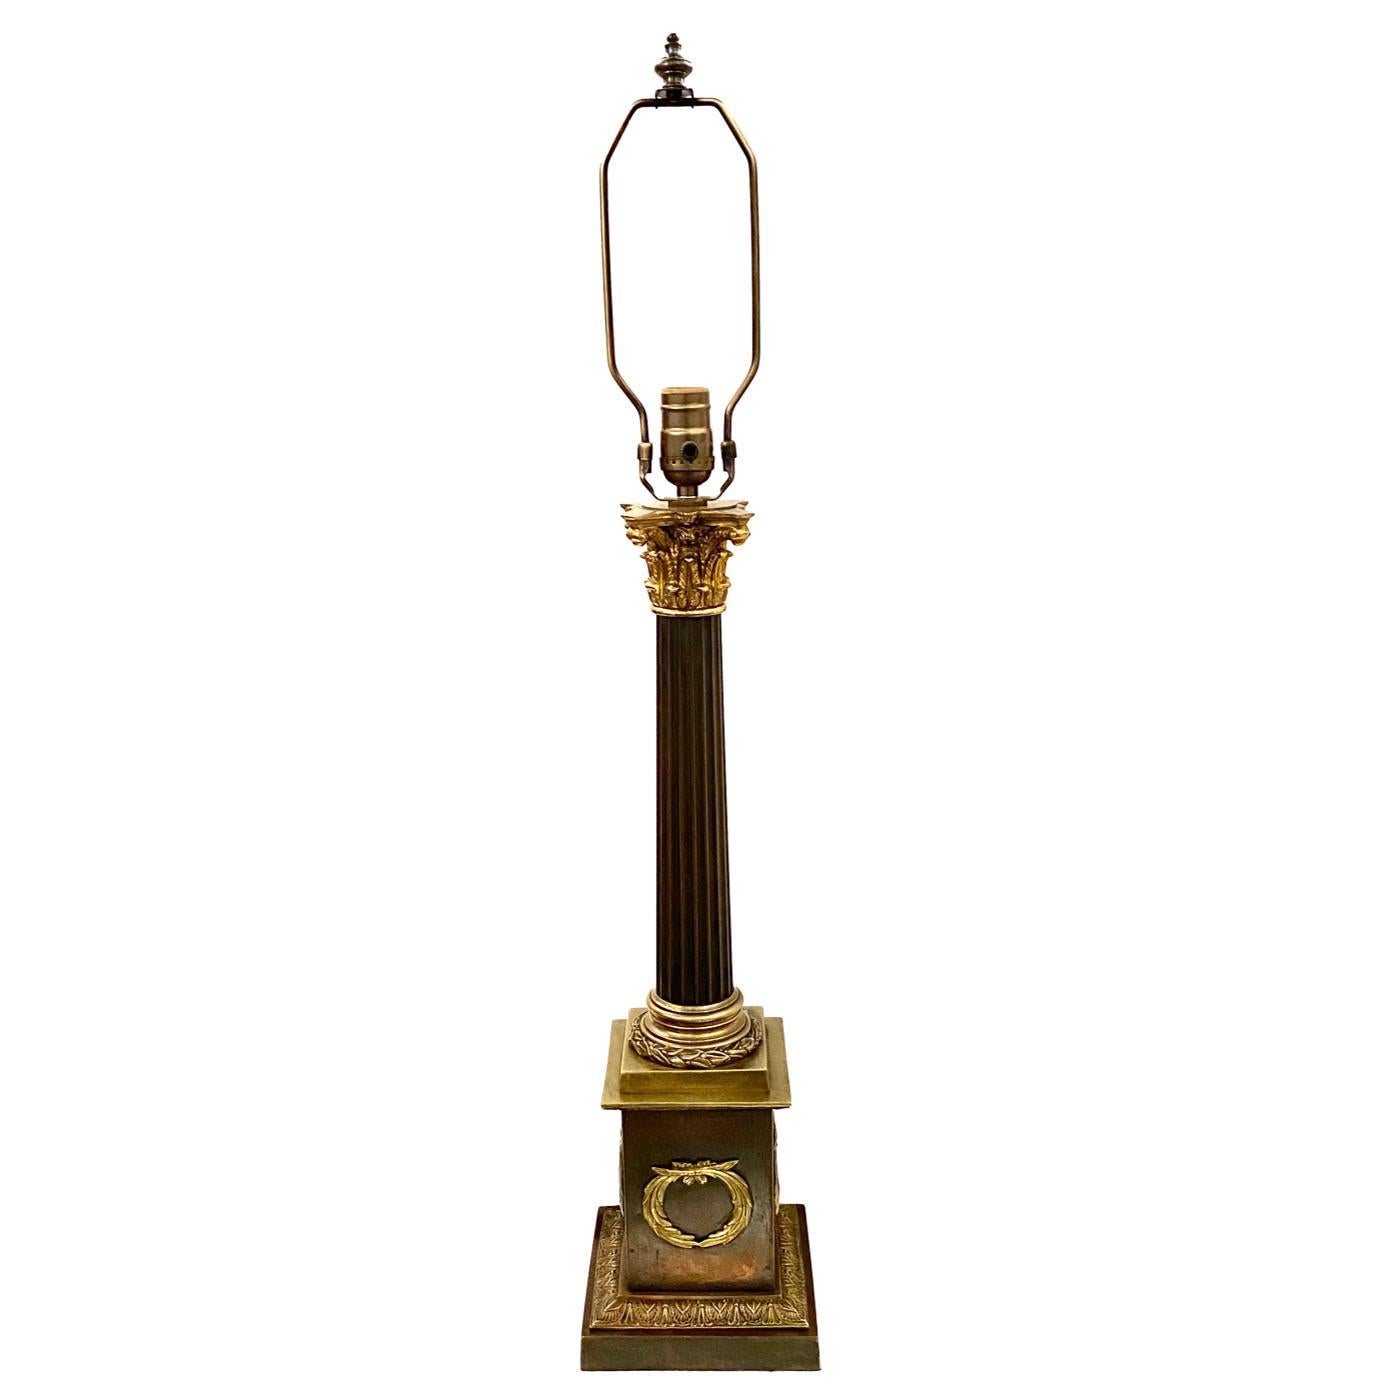 A circa 1920s French Empire-style table lamp with original patina.

Measurements:
Height of body 23.5